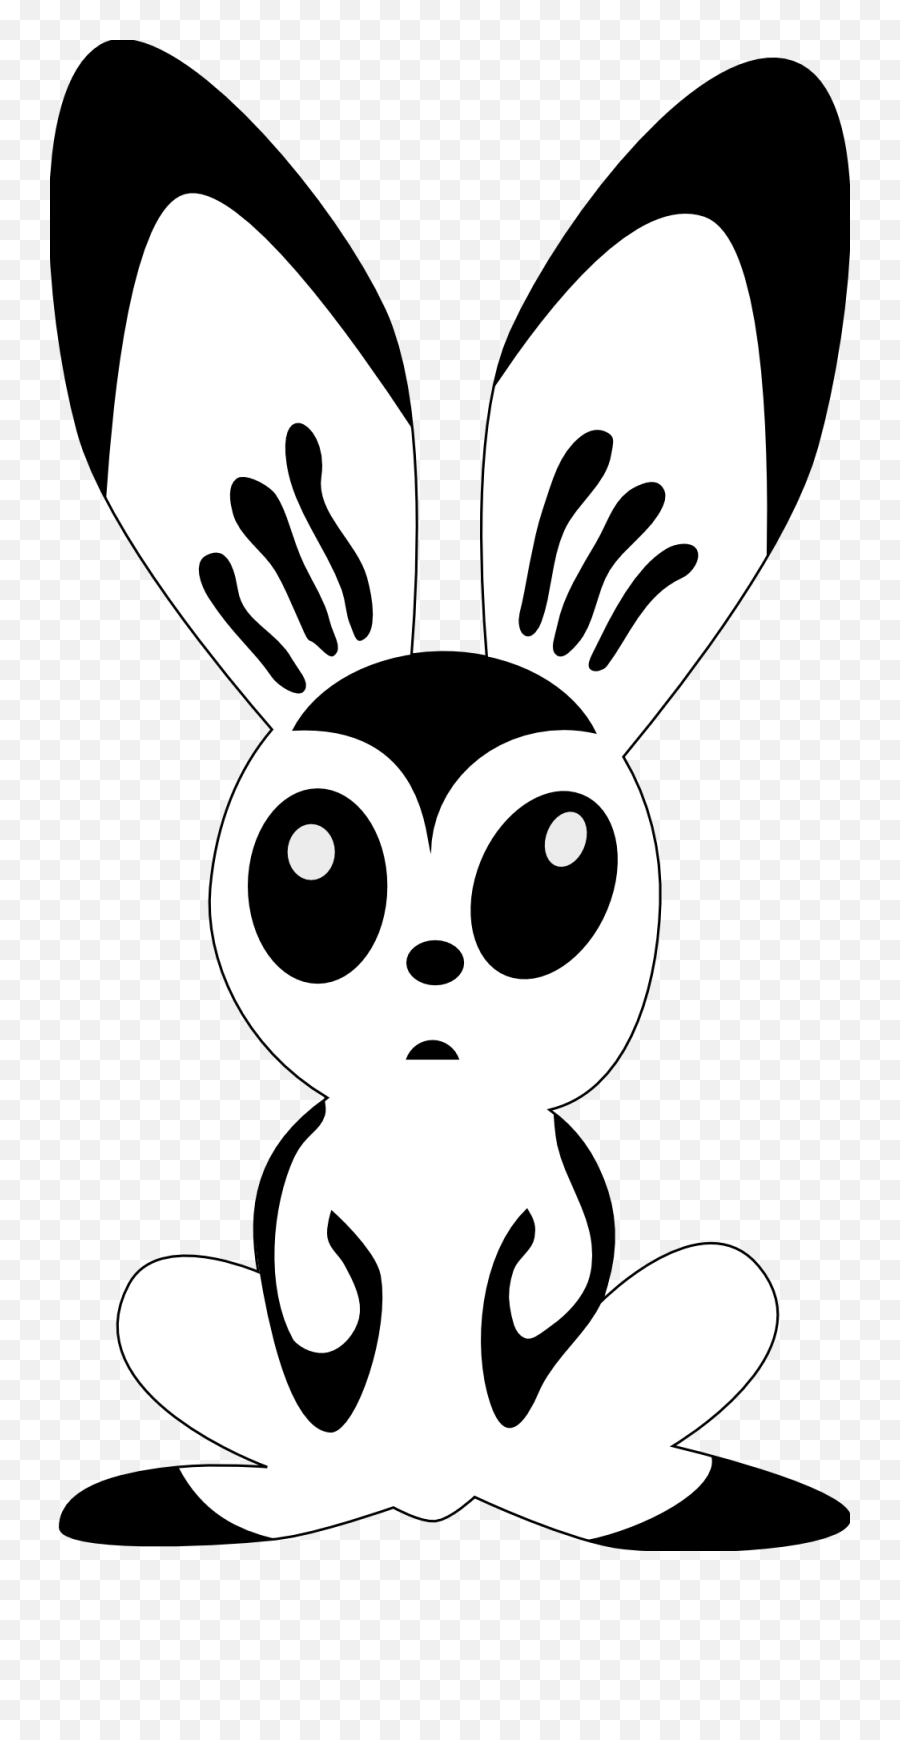 Download Clip Art Rabbit - Black And White Easter Bunny Bannicula Clipart Black And White Emoji,Bunny Clipart